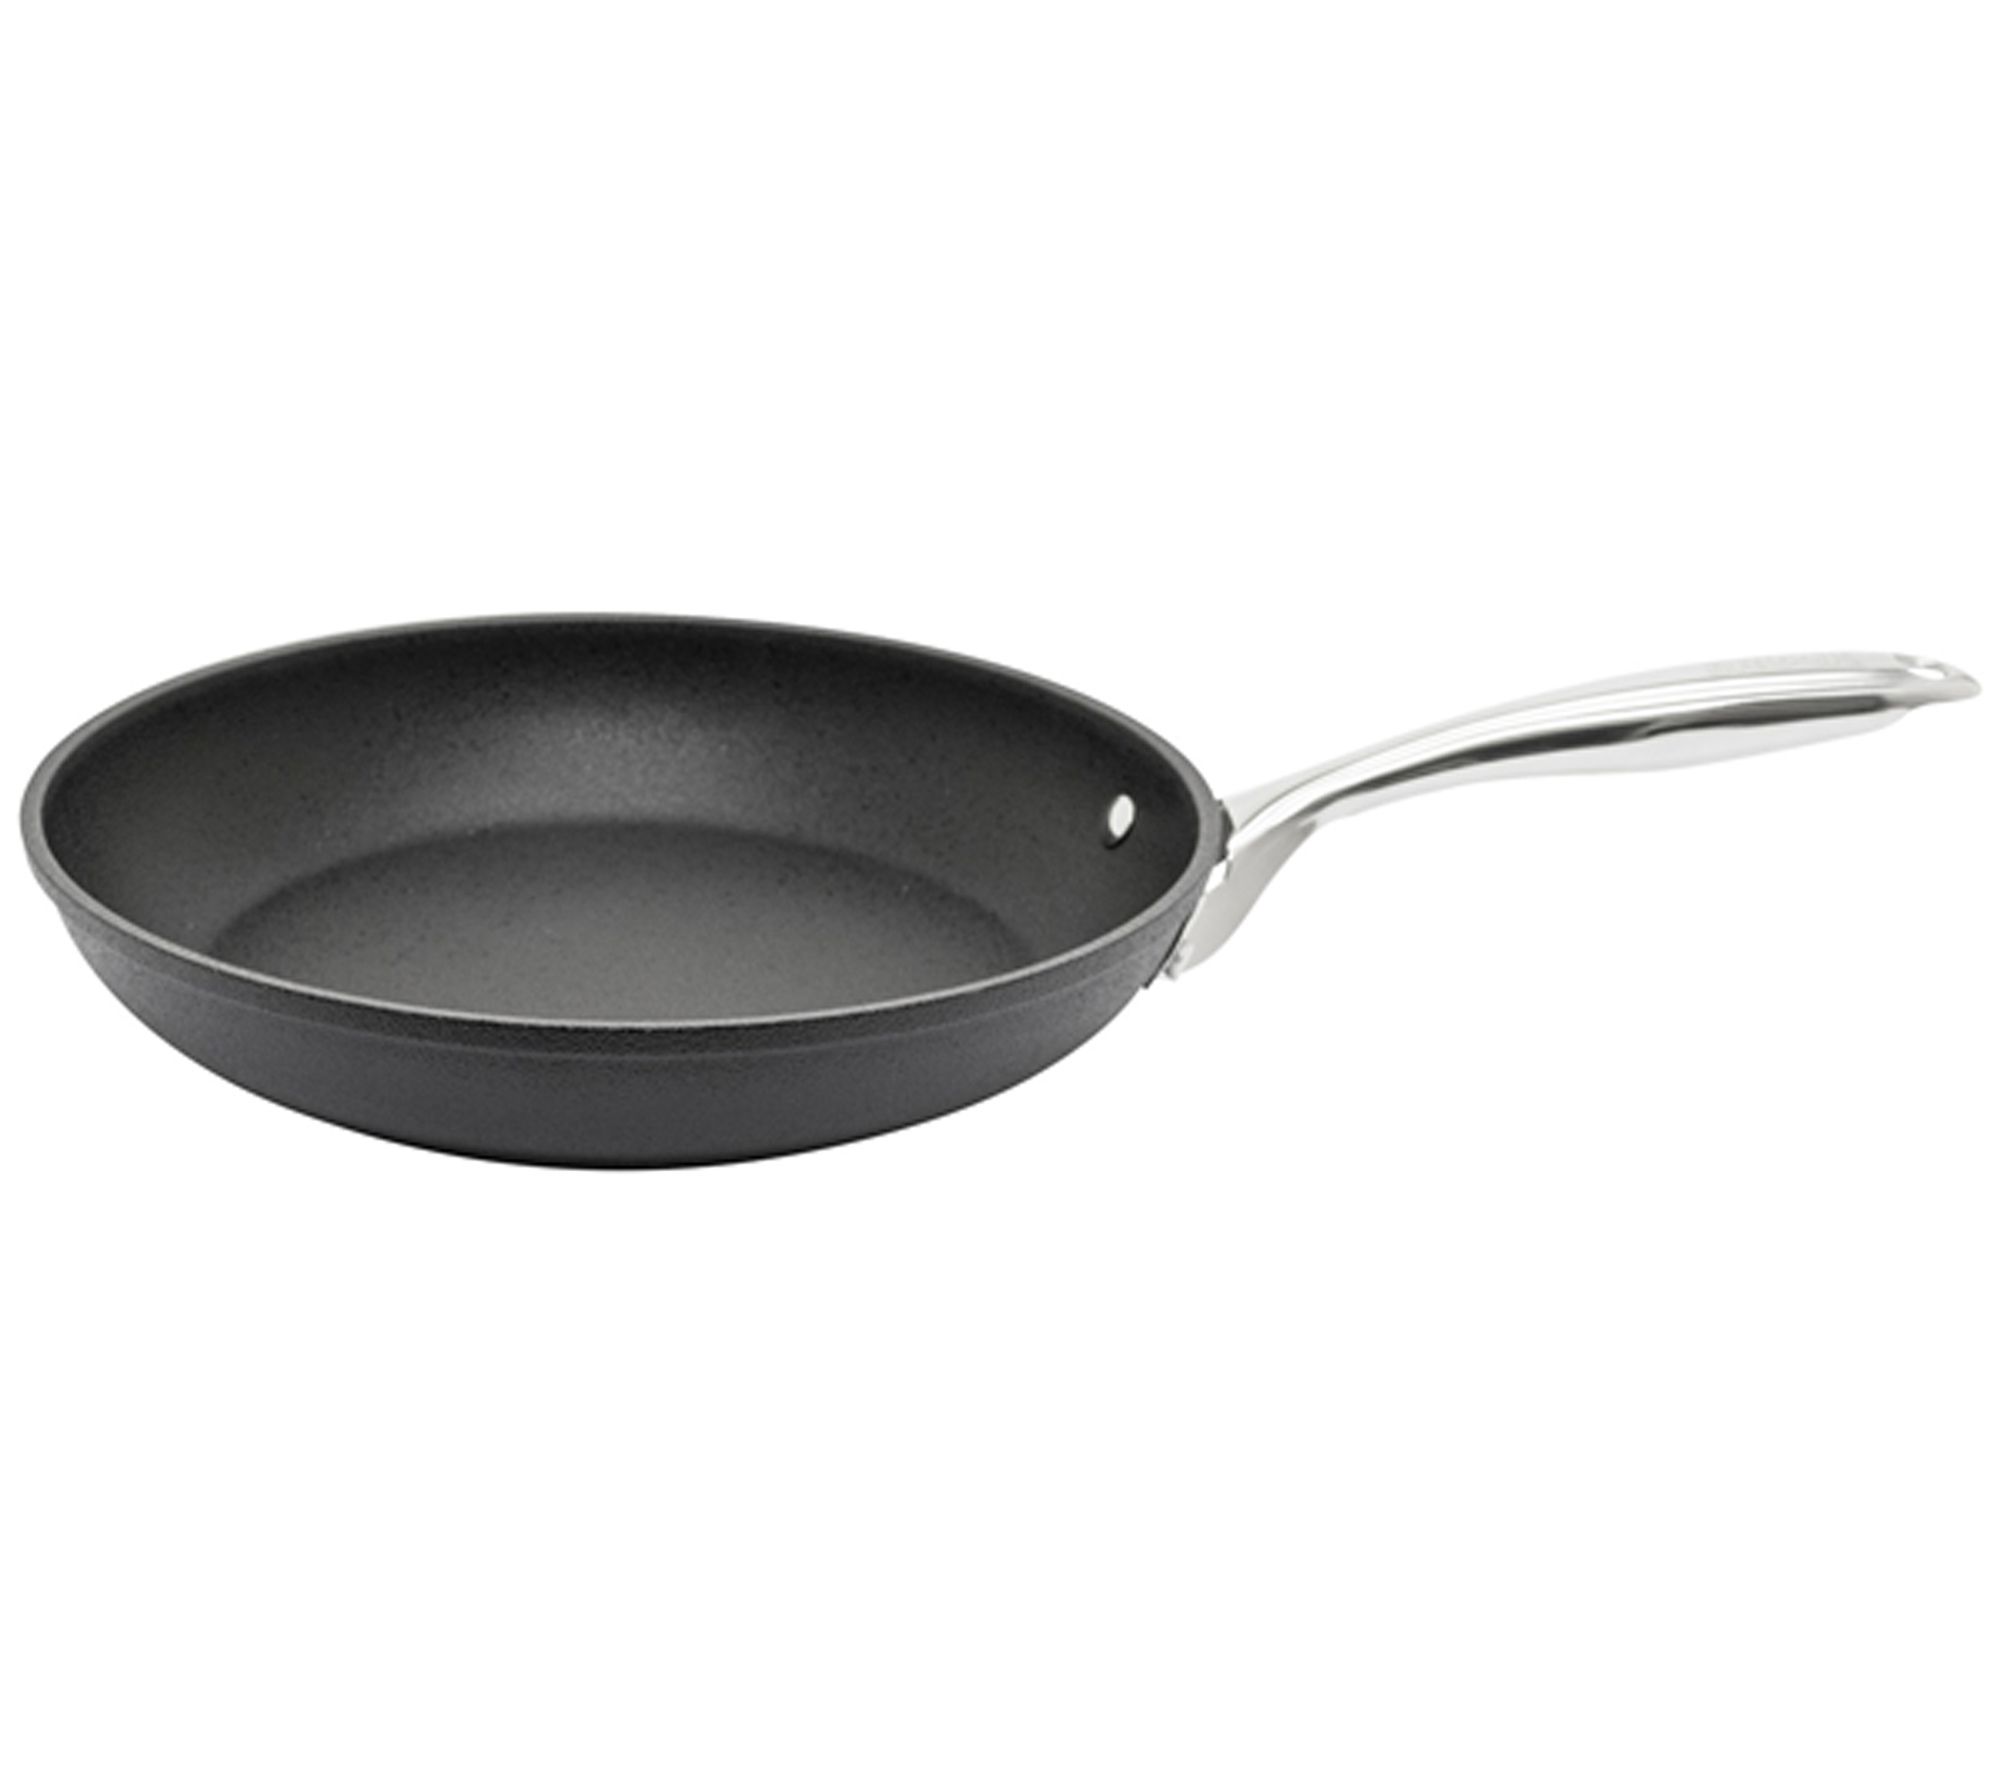 THE ROCK by Starfrit Personal Fry Pan with Stainless Steel Handle